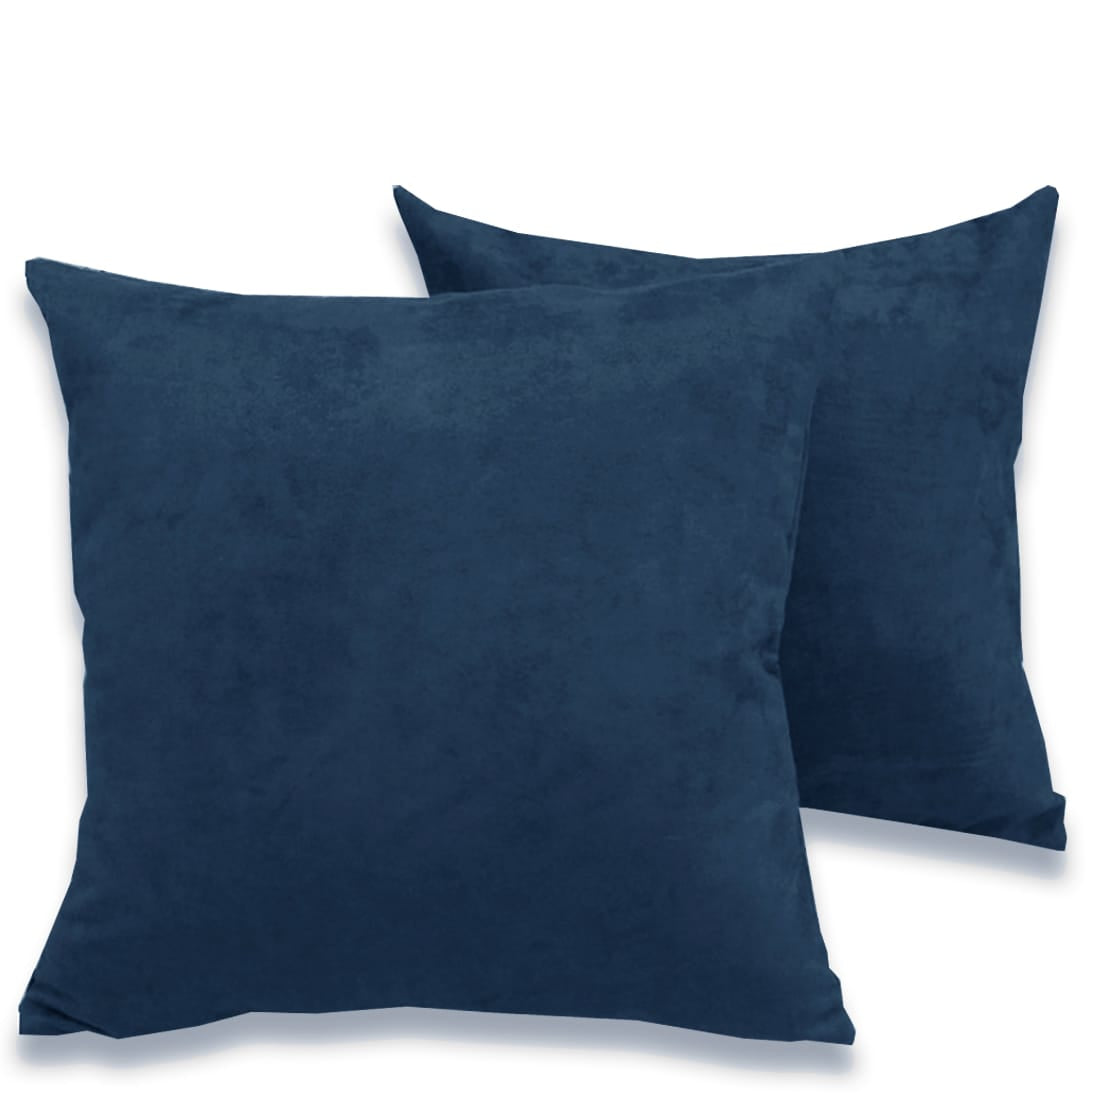 SUEDE Luxurious Microfibre Cushion Cover set - Navy Blue